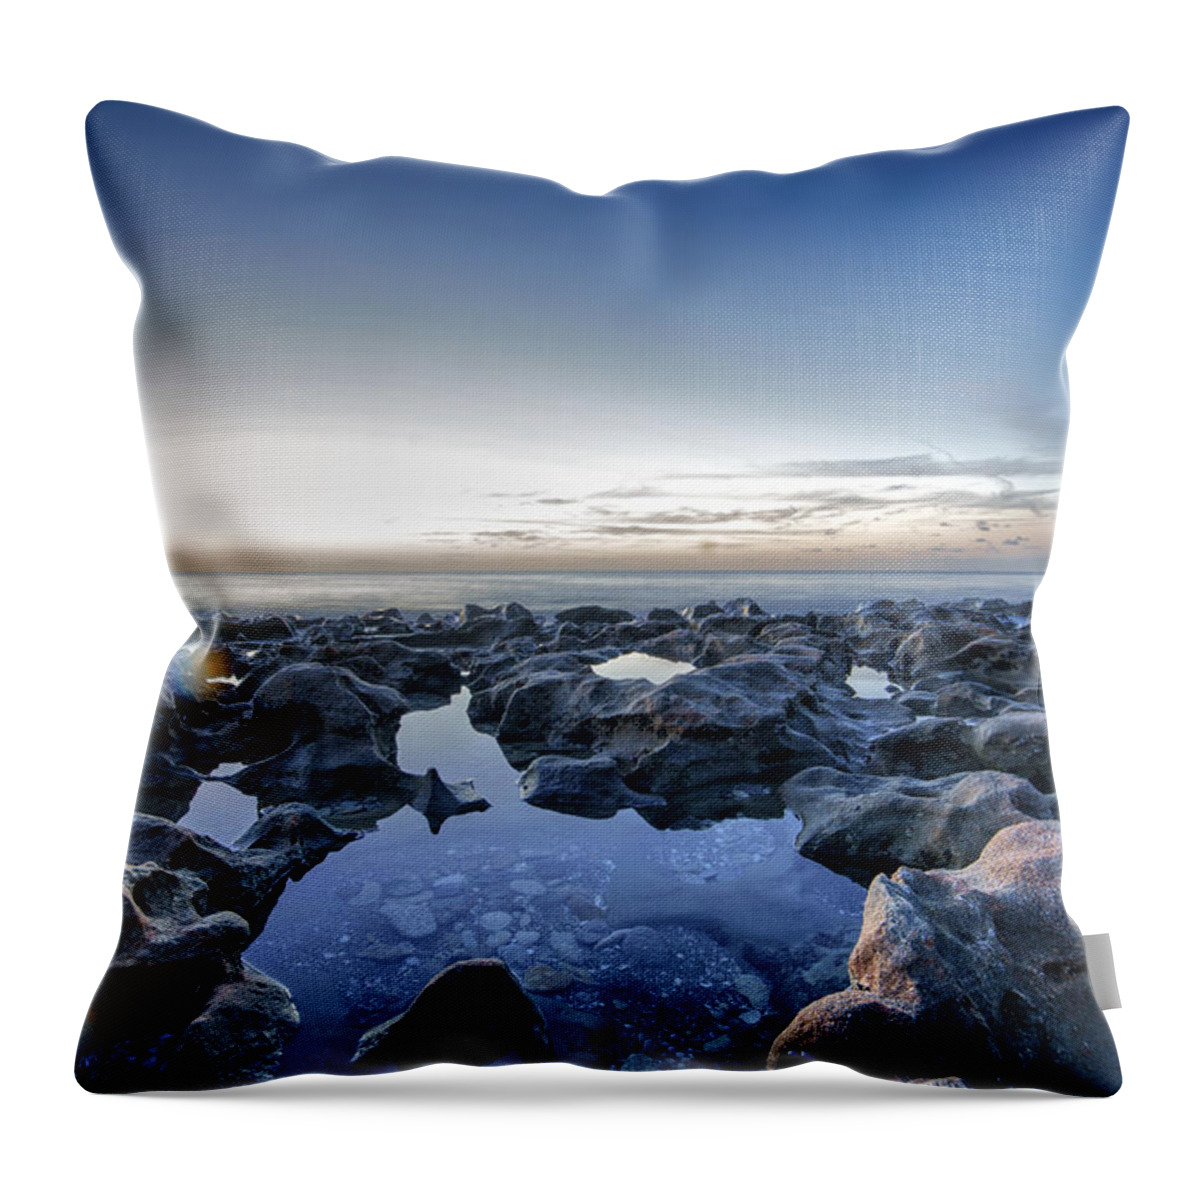 Blowing Rocks Preserve Throw Pillow featuring the photograph Blowing Rocks Preserve #1 by Mike Sperduto